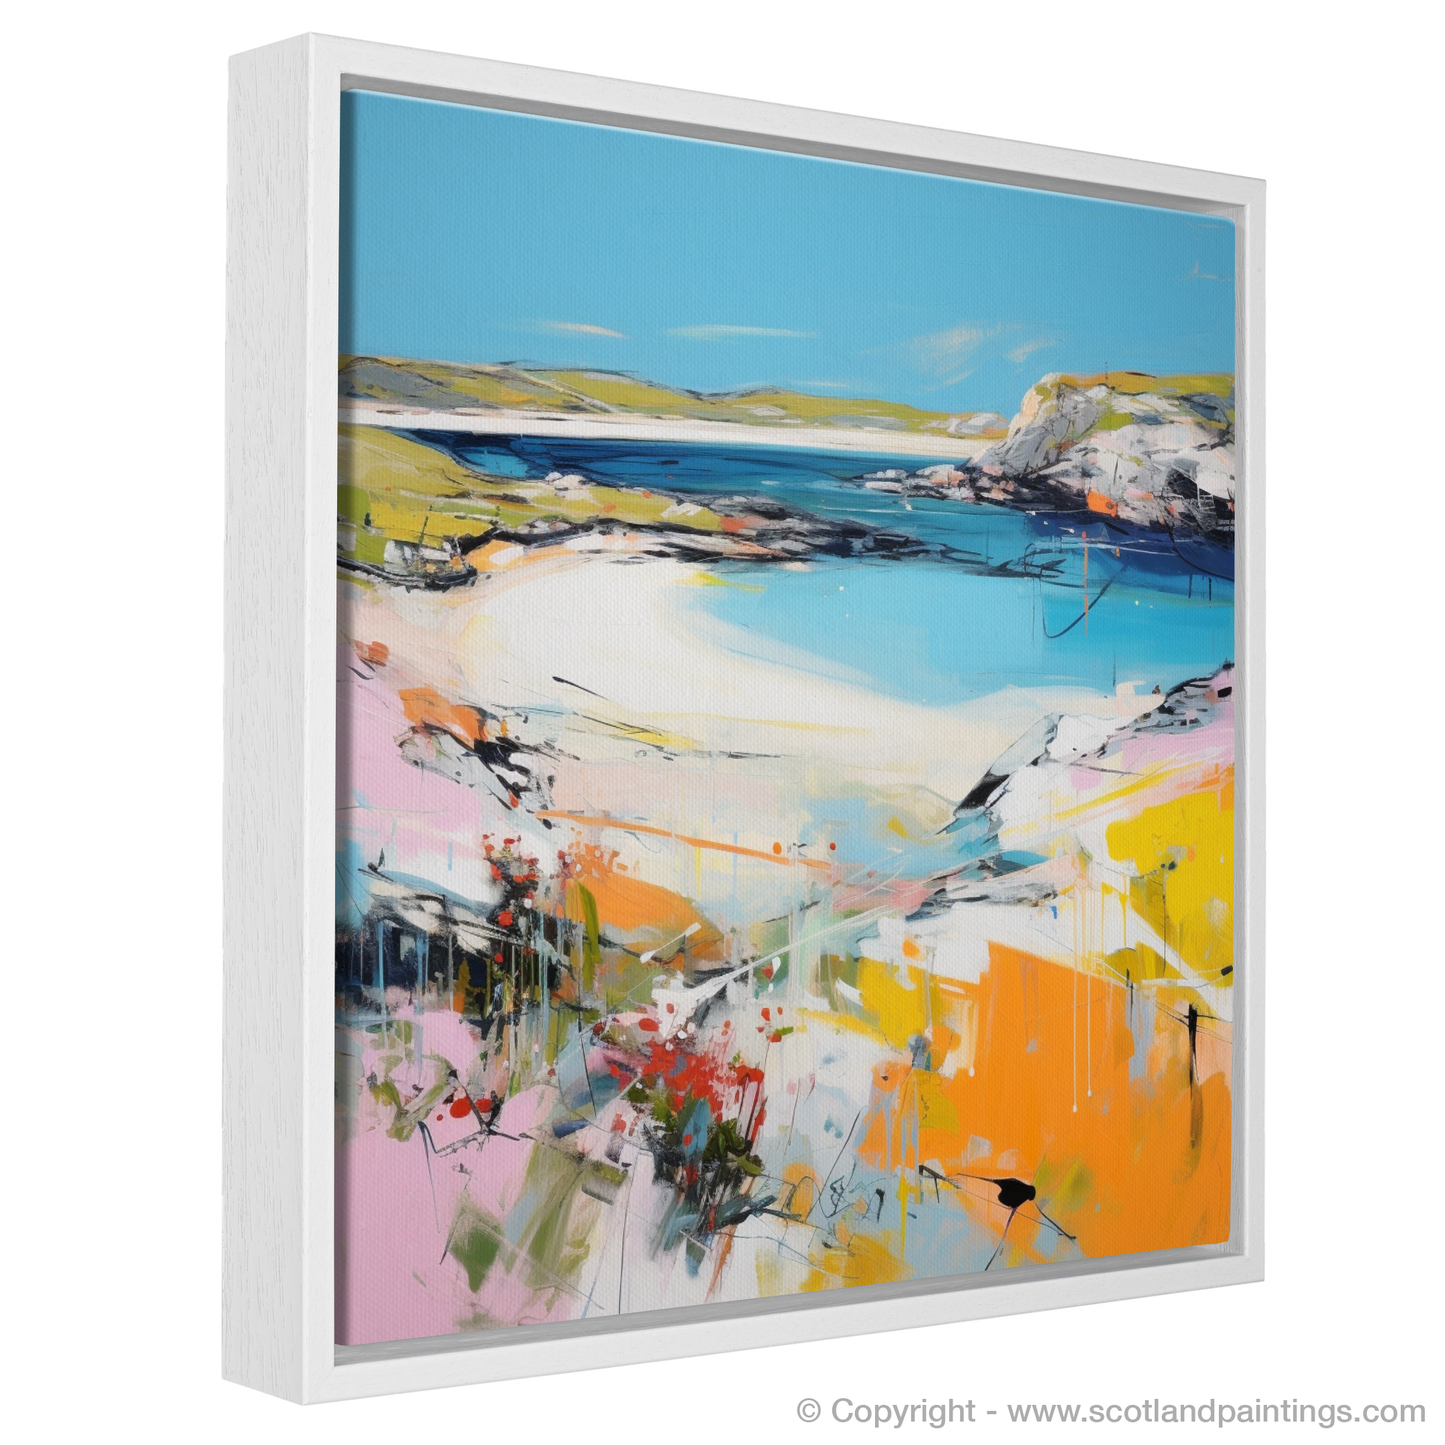 Painting and Art Print of Achmelvich Bay, Sutherland in summer entitled "Achmelvich Bay Summer Radiance".